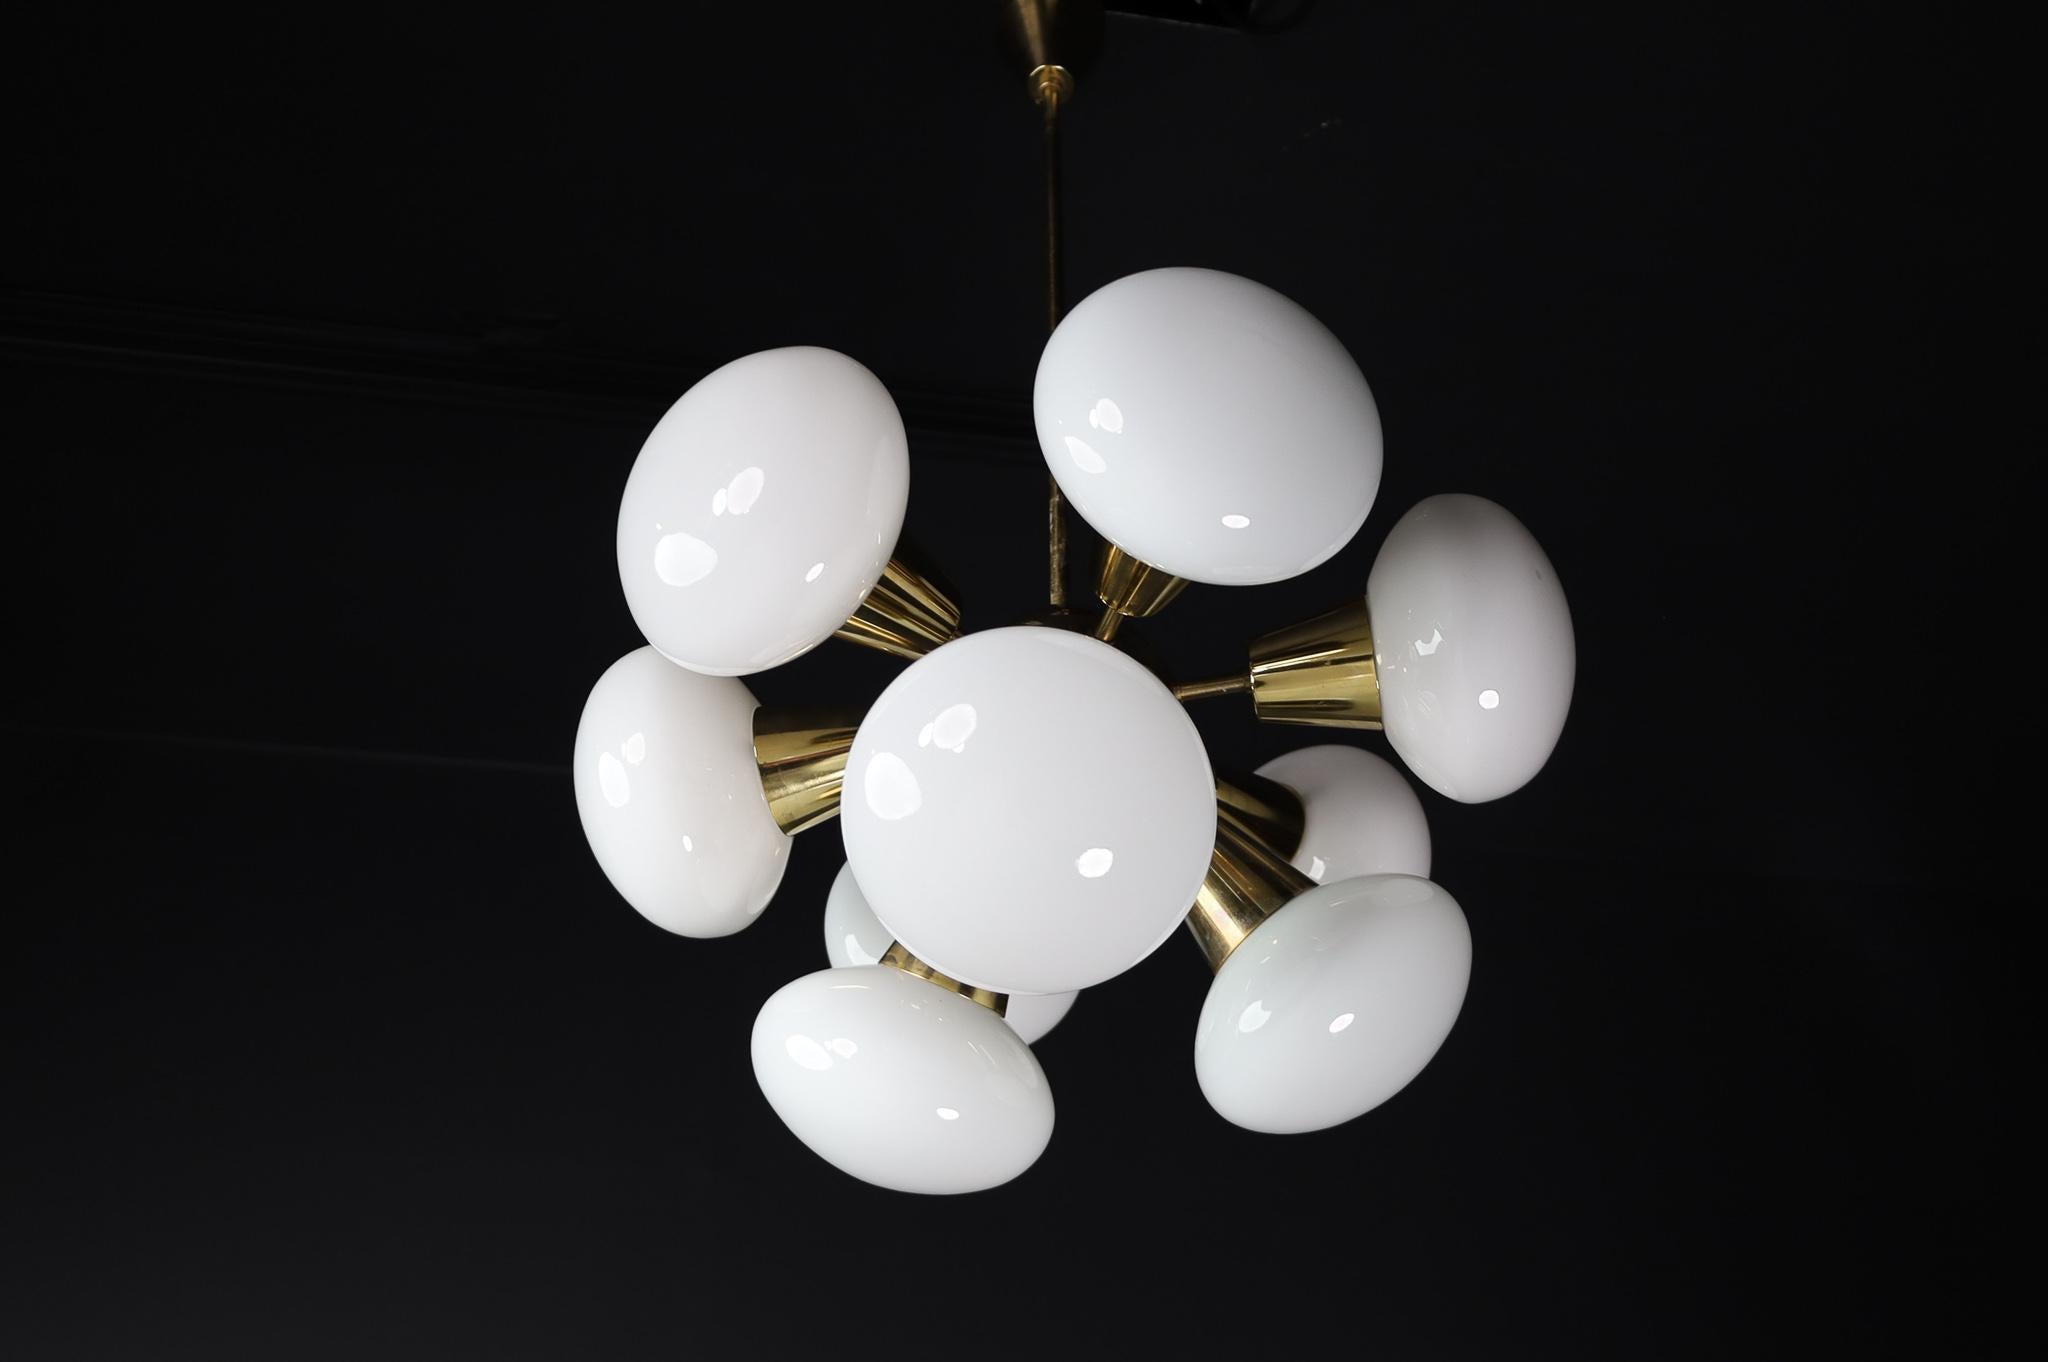 Sputnik chandeliers with brass fixture and Opaline spheres. These chandeliers with brass frame consist of twelve lights. The diffuse light it spreads is very atmospheric. Completed with the opaline glass and brass details, these chandeliers will